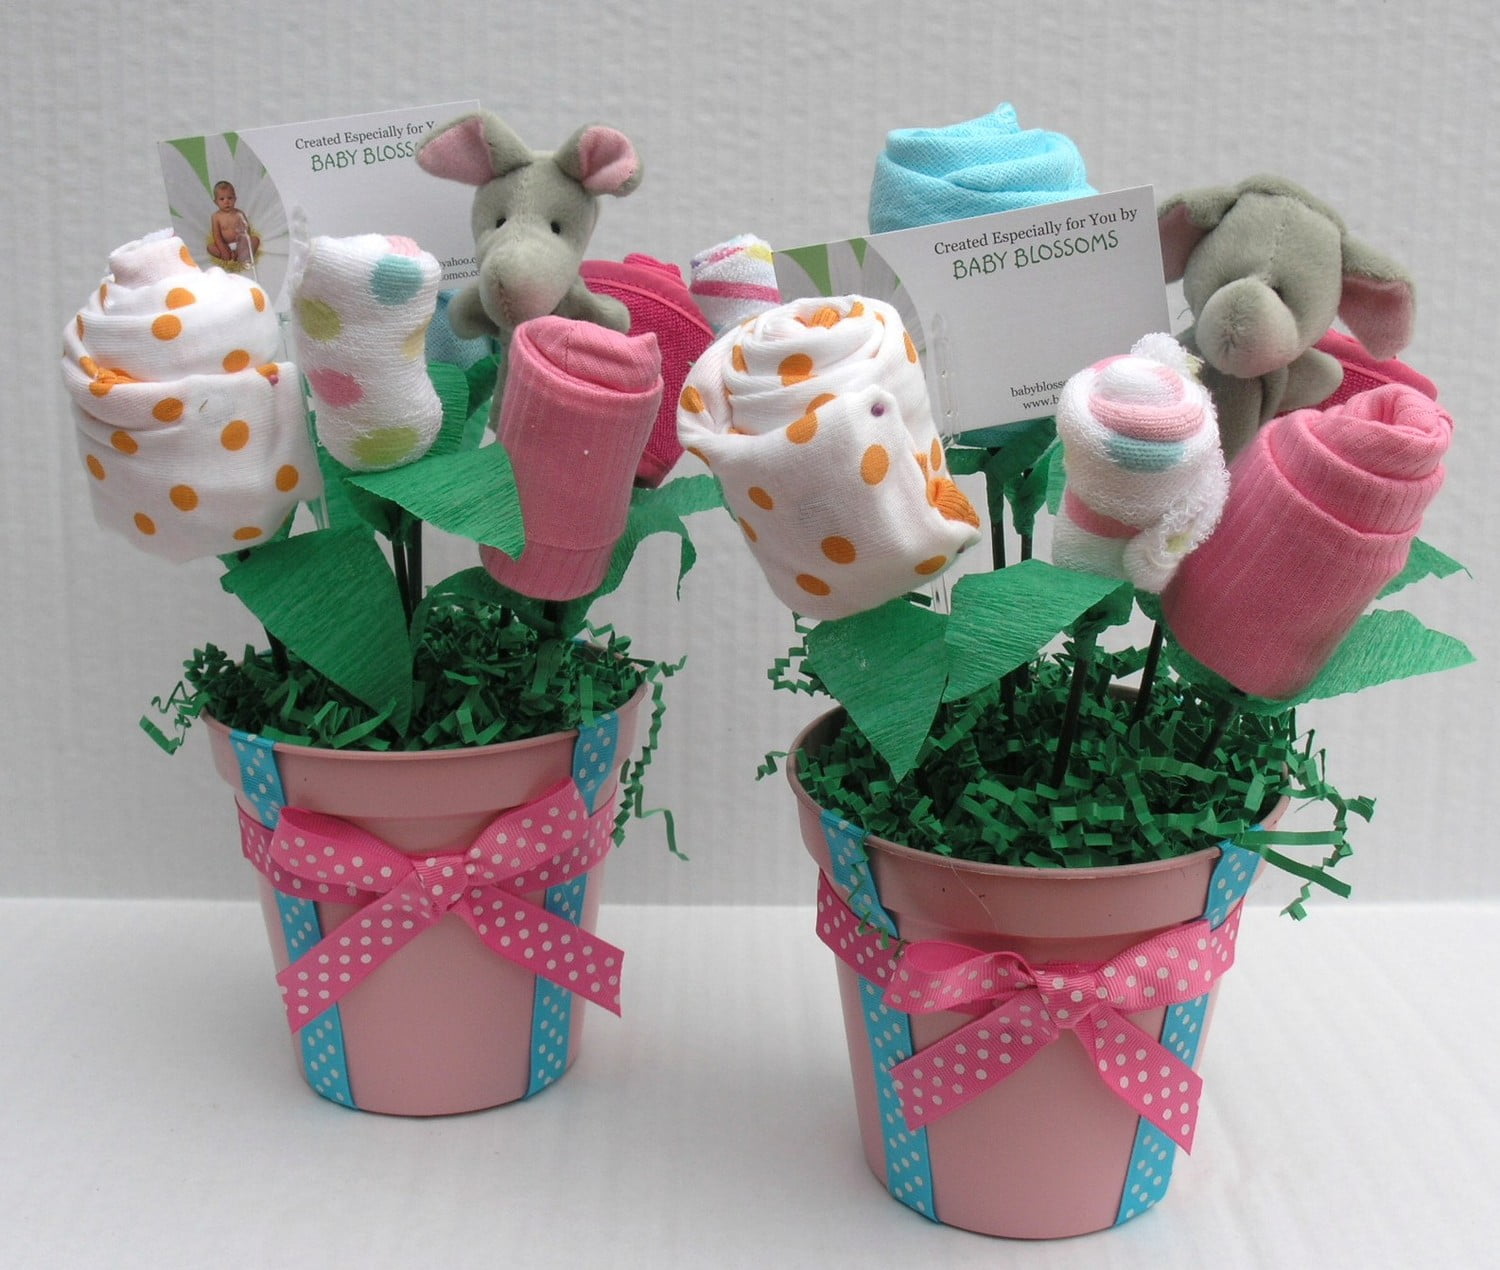 Baby Blossom Centerpieces Ideas For Baby Shower